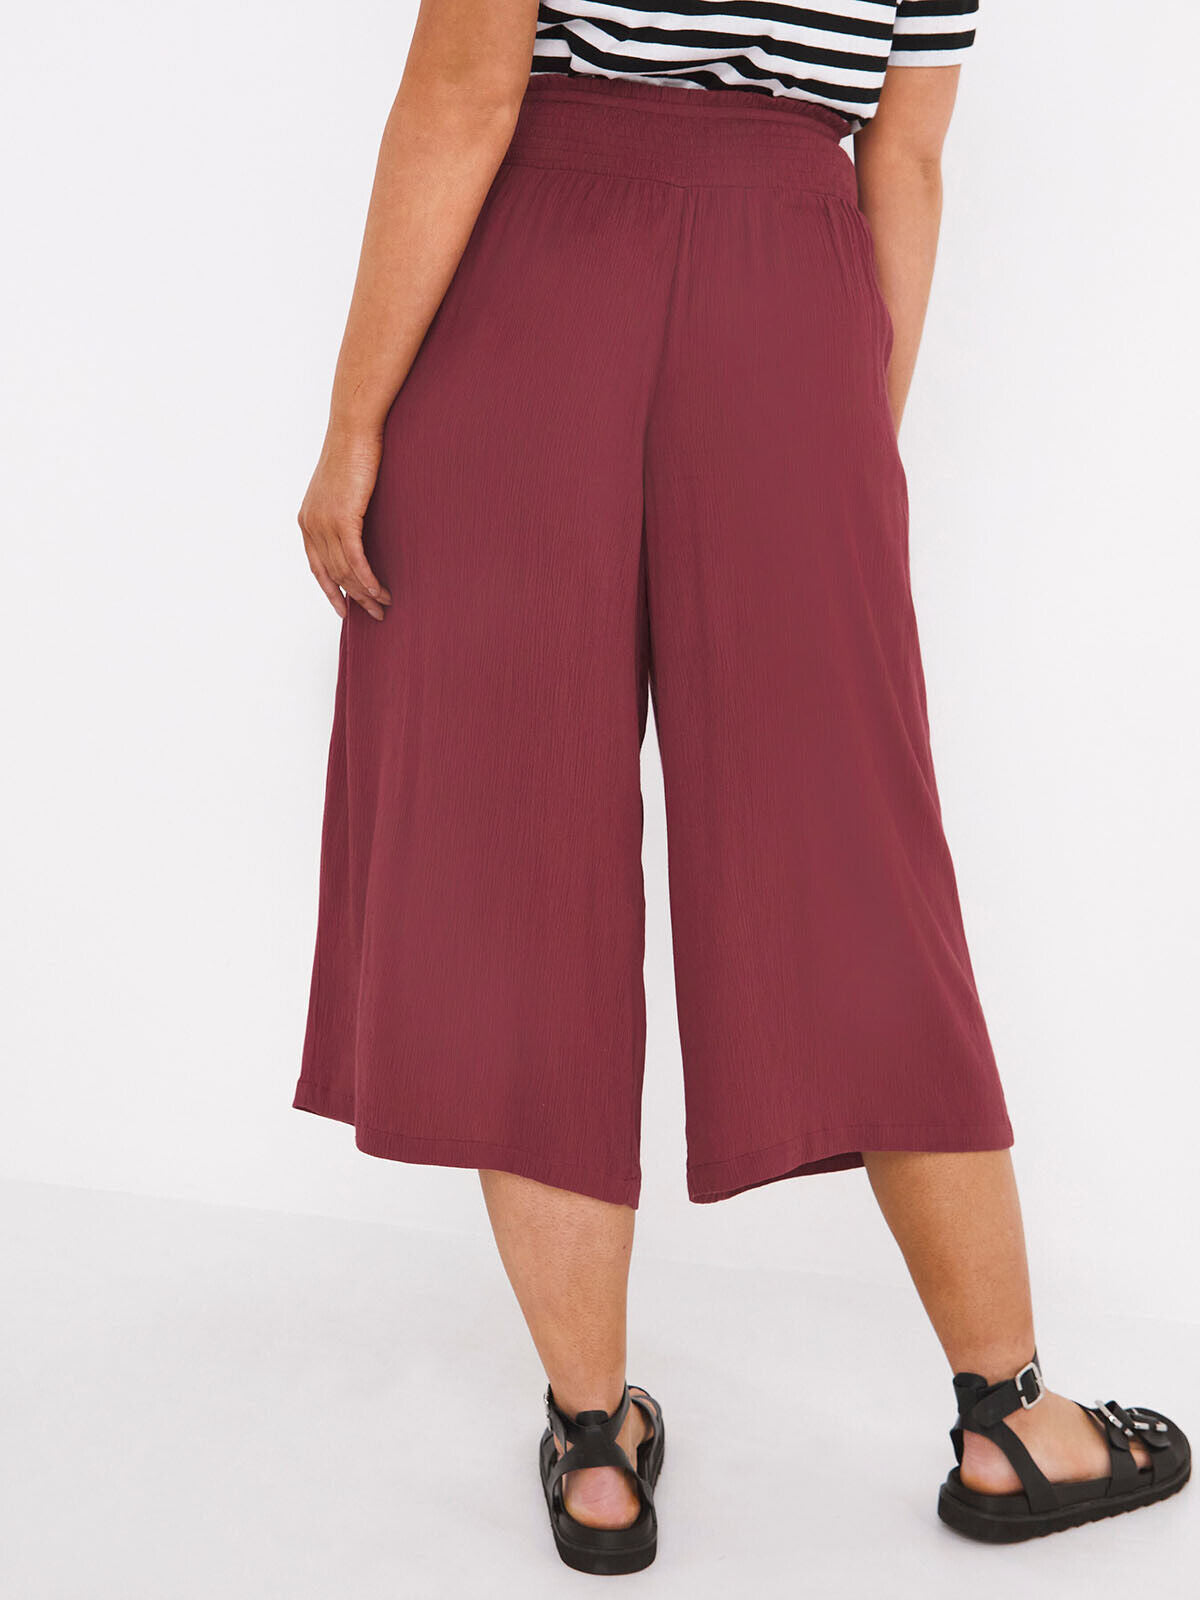 Capsule Dusty Rose Pull On Crinkle Wide Leg Culottes Sizes 16, 18, 20, 22, 24